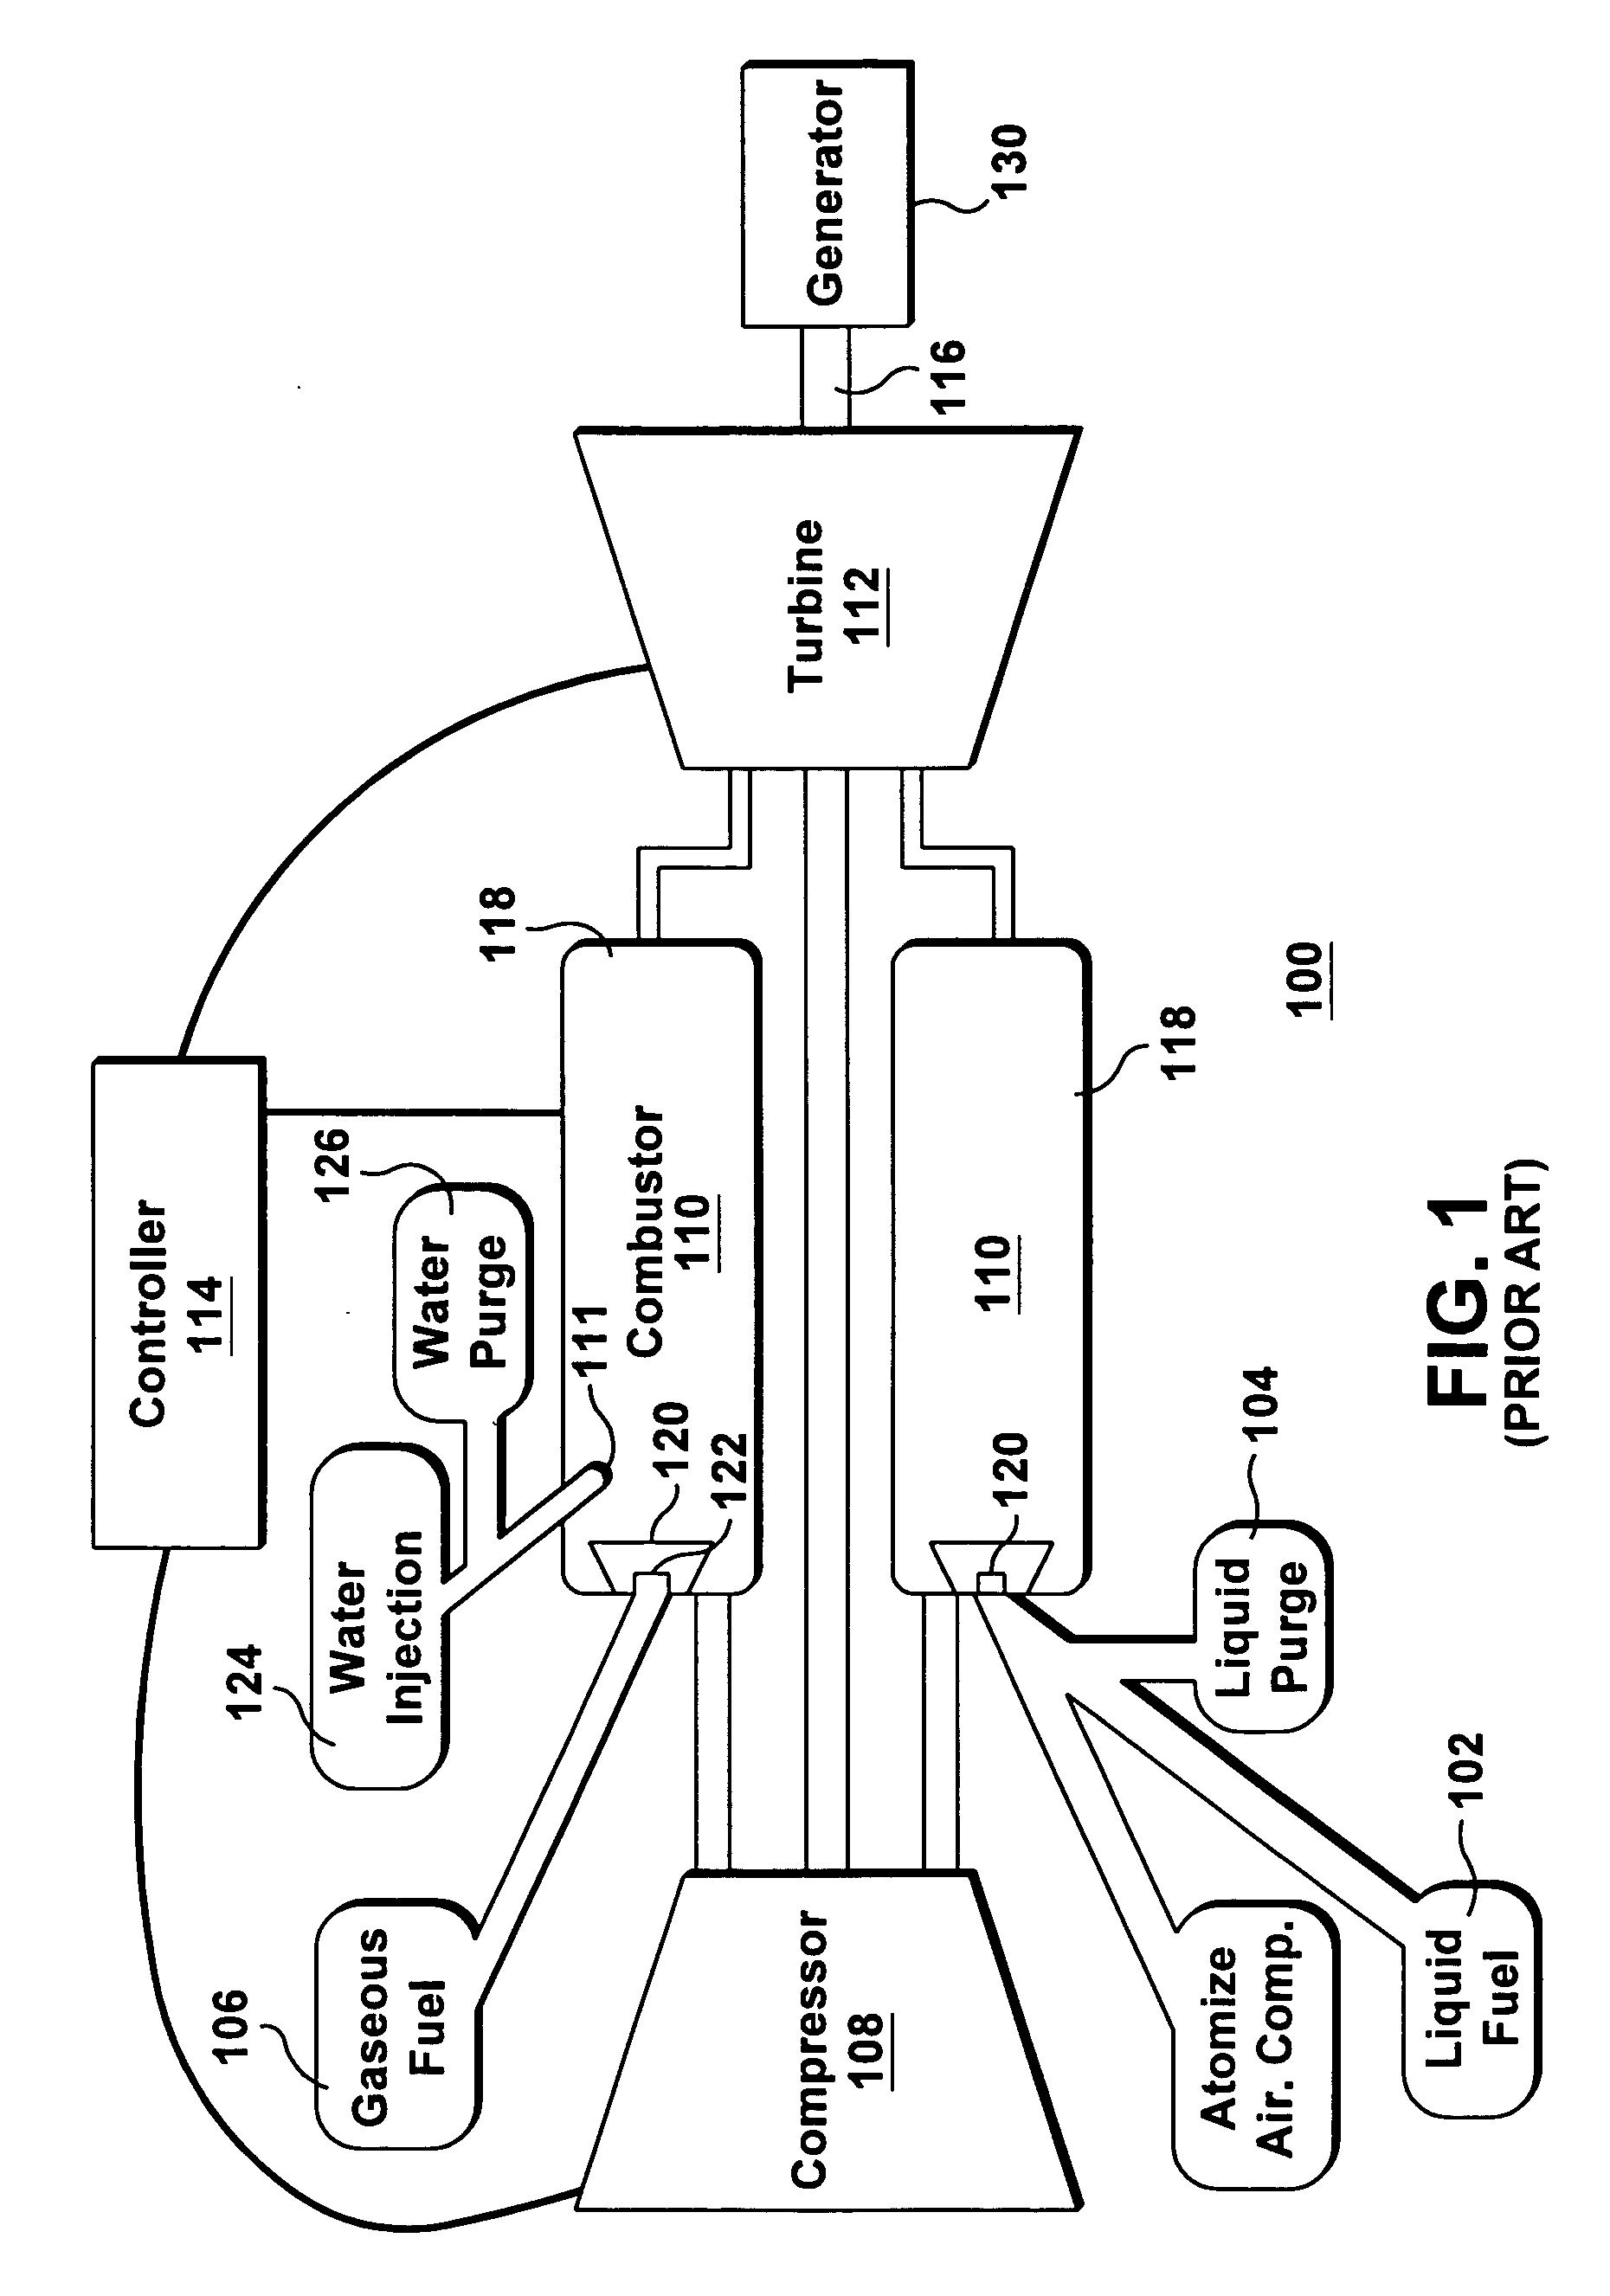 Method for detecting onset of uncontrolled fuel in a gas turbine combustor